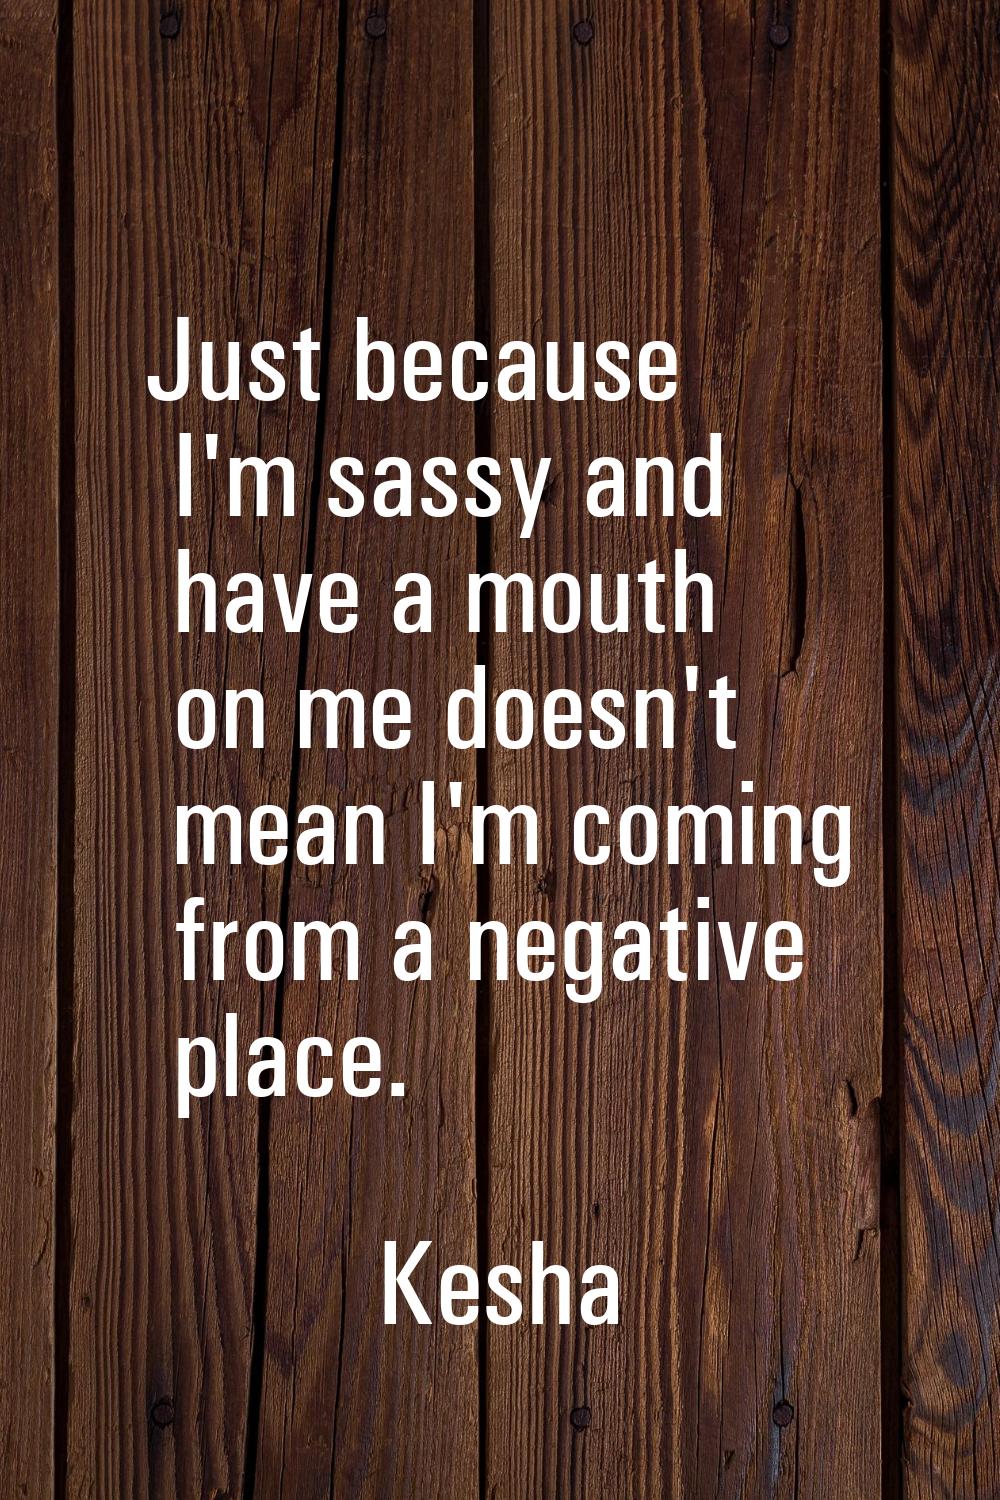 Just because I'm sassy and have a mouth on me doesn't mean I'm coming from a negative place.